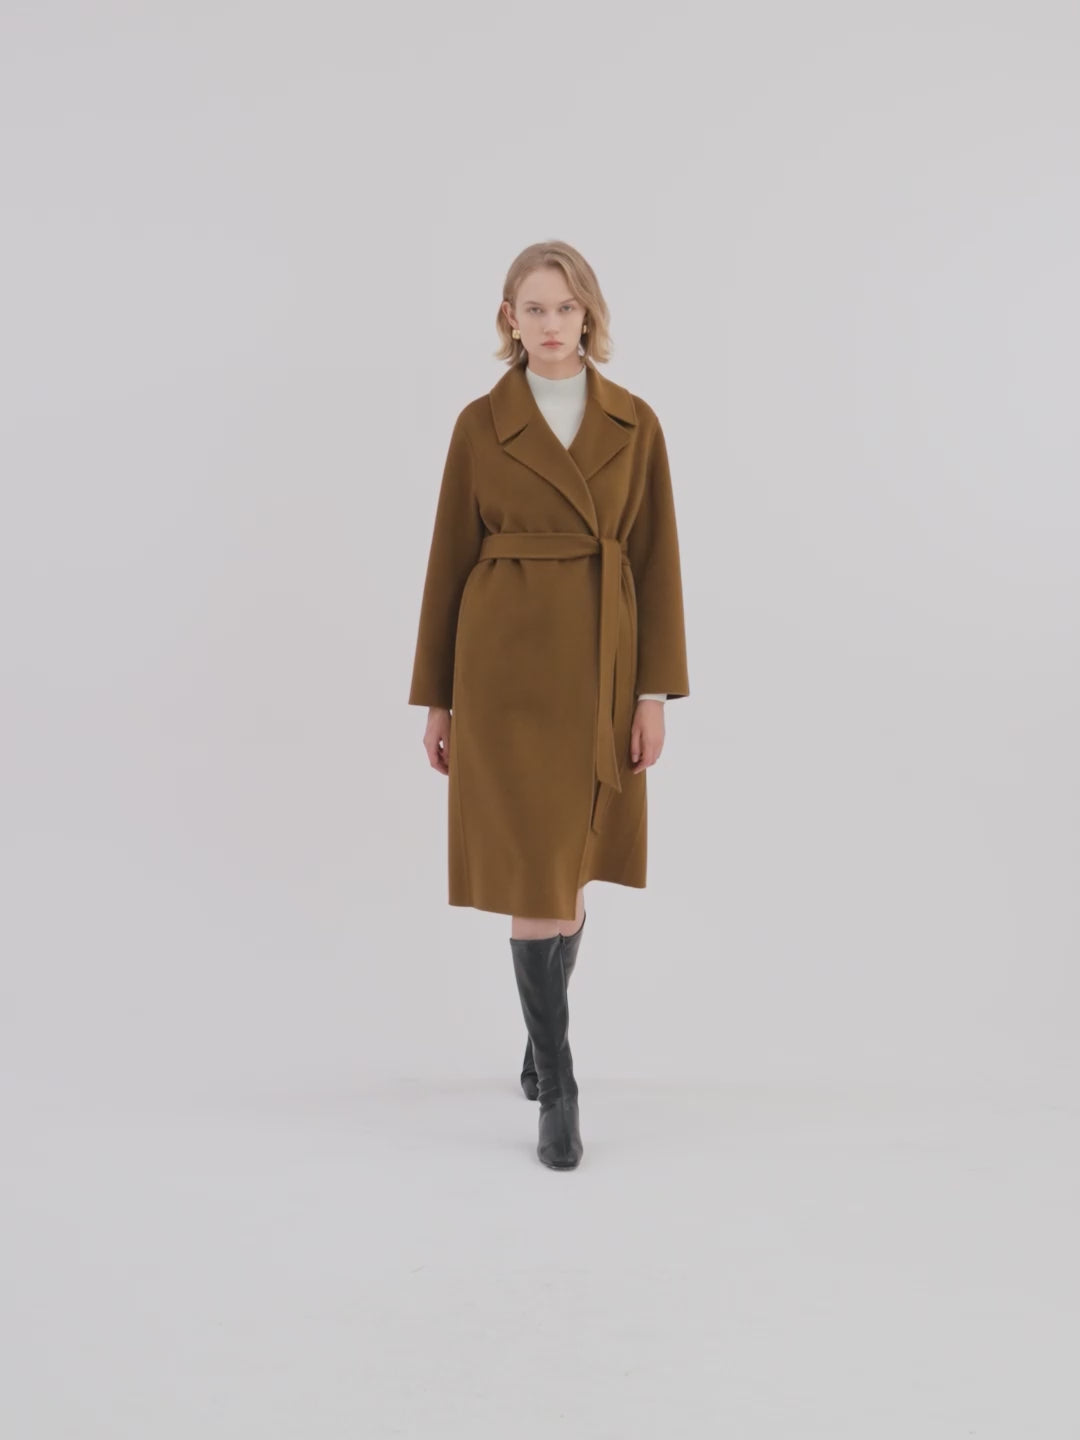 Wool And Cashmere Double-Faced Women Coat